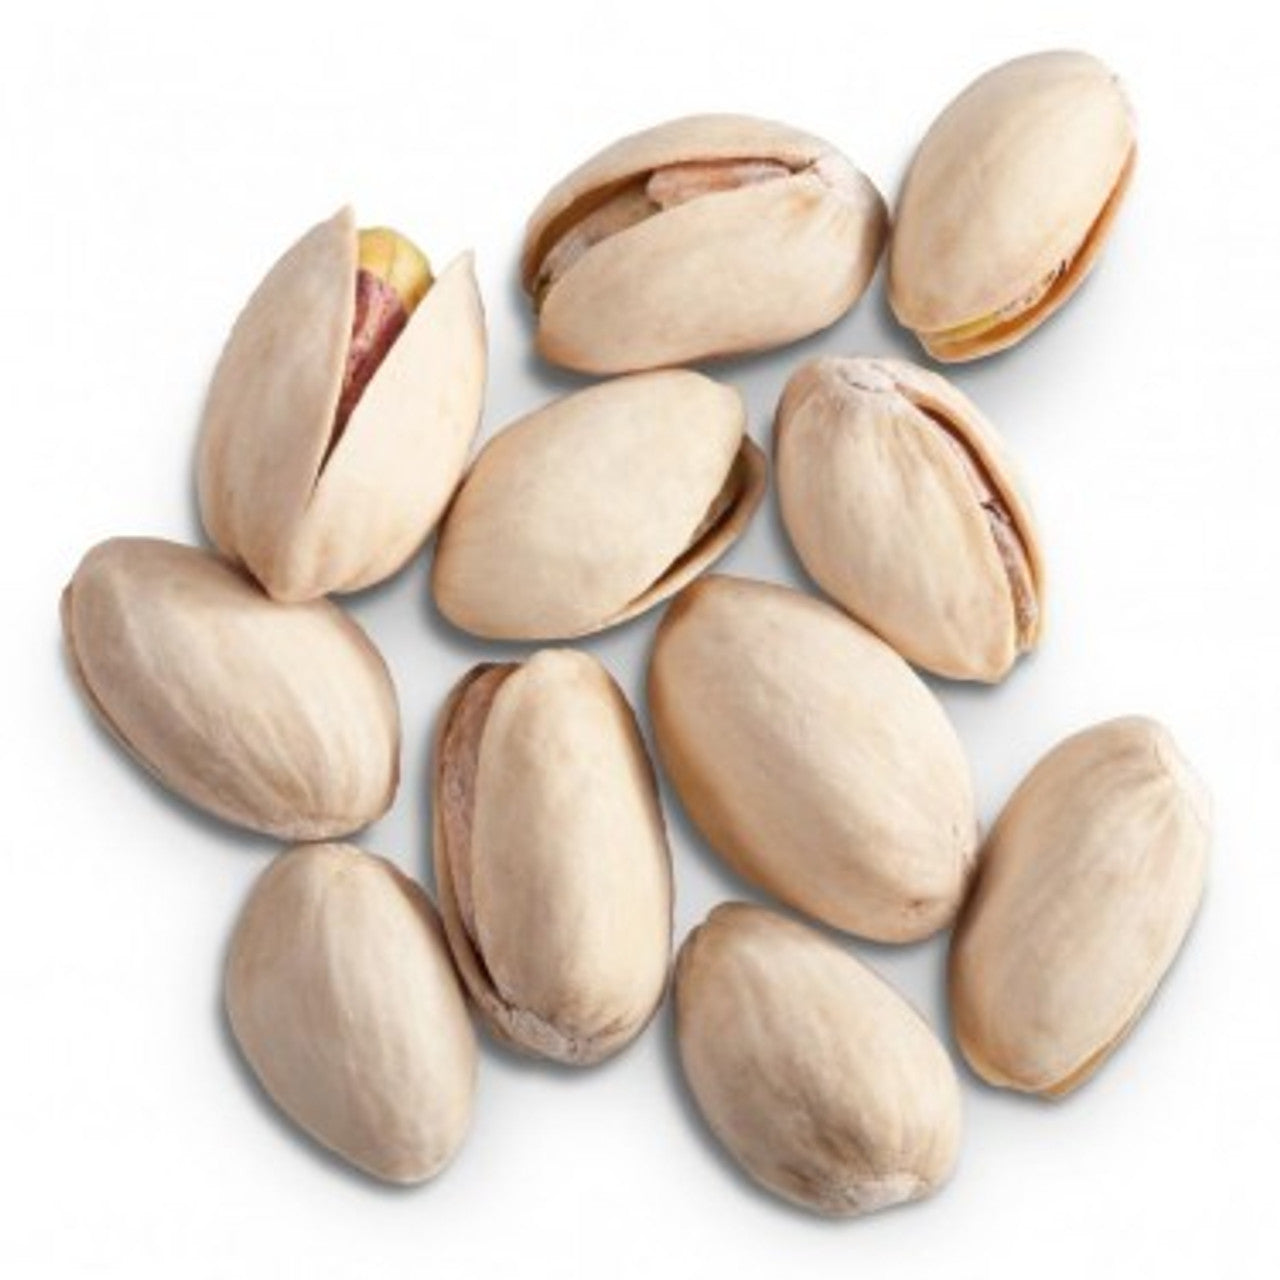 Pistachios, Natural Roasted Unsalted